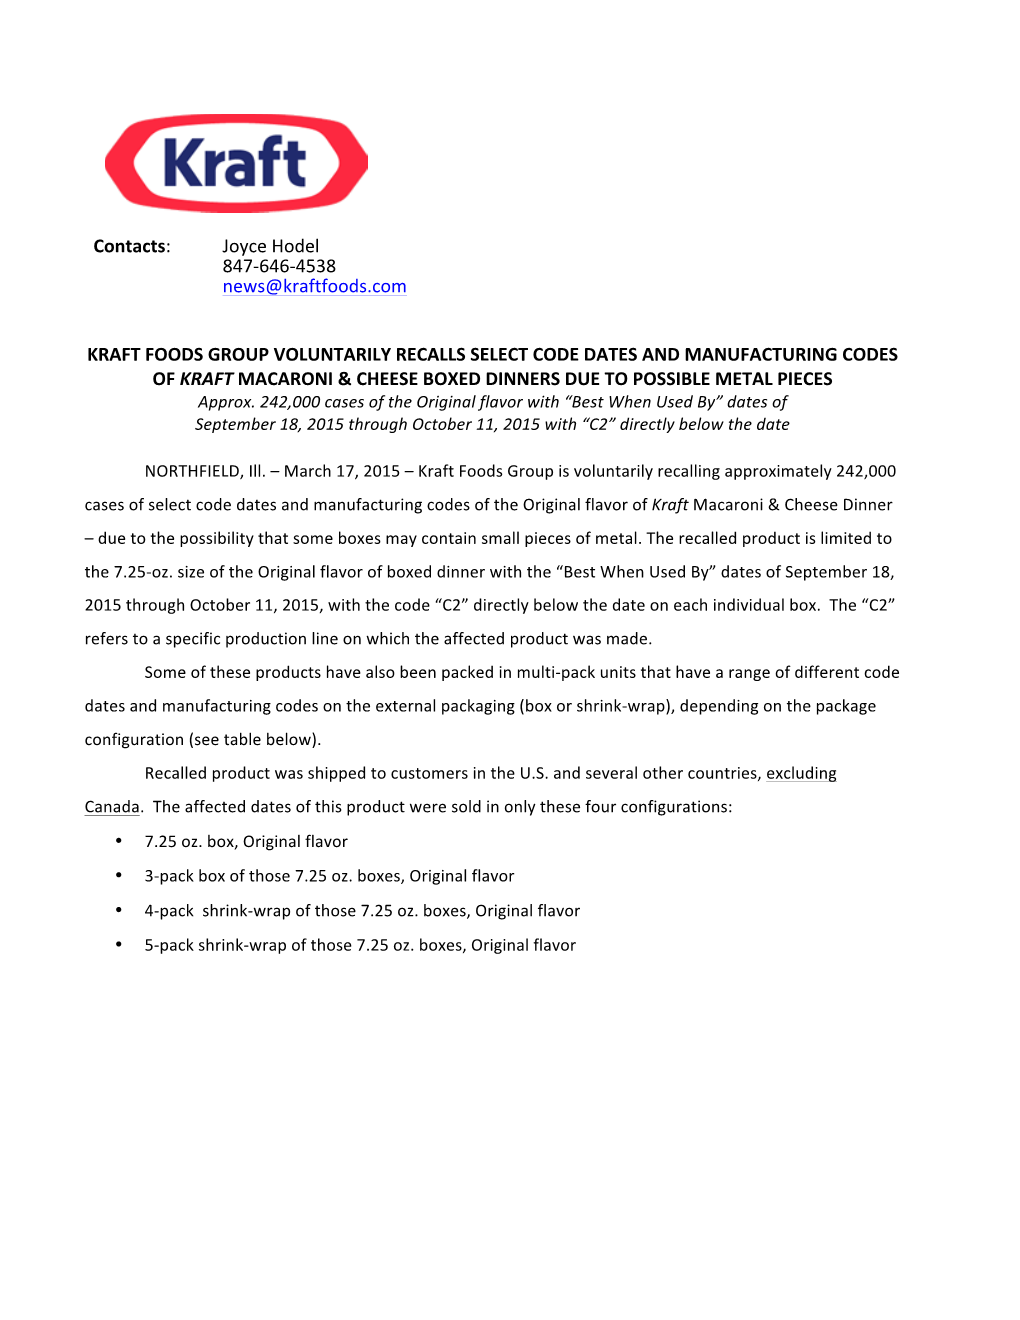 KRAFT FOODS GROUP VOLUNTARILY RECALLS SELECT CODE DATES and MANUFACTURING CODES of KRAFT MACARONI & CHEESE BOXED DINNERS DUE to POSSIBLE METAL PIECES Approx